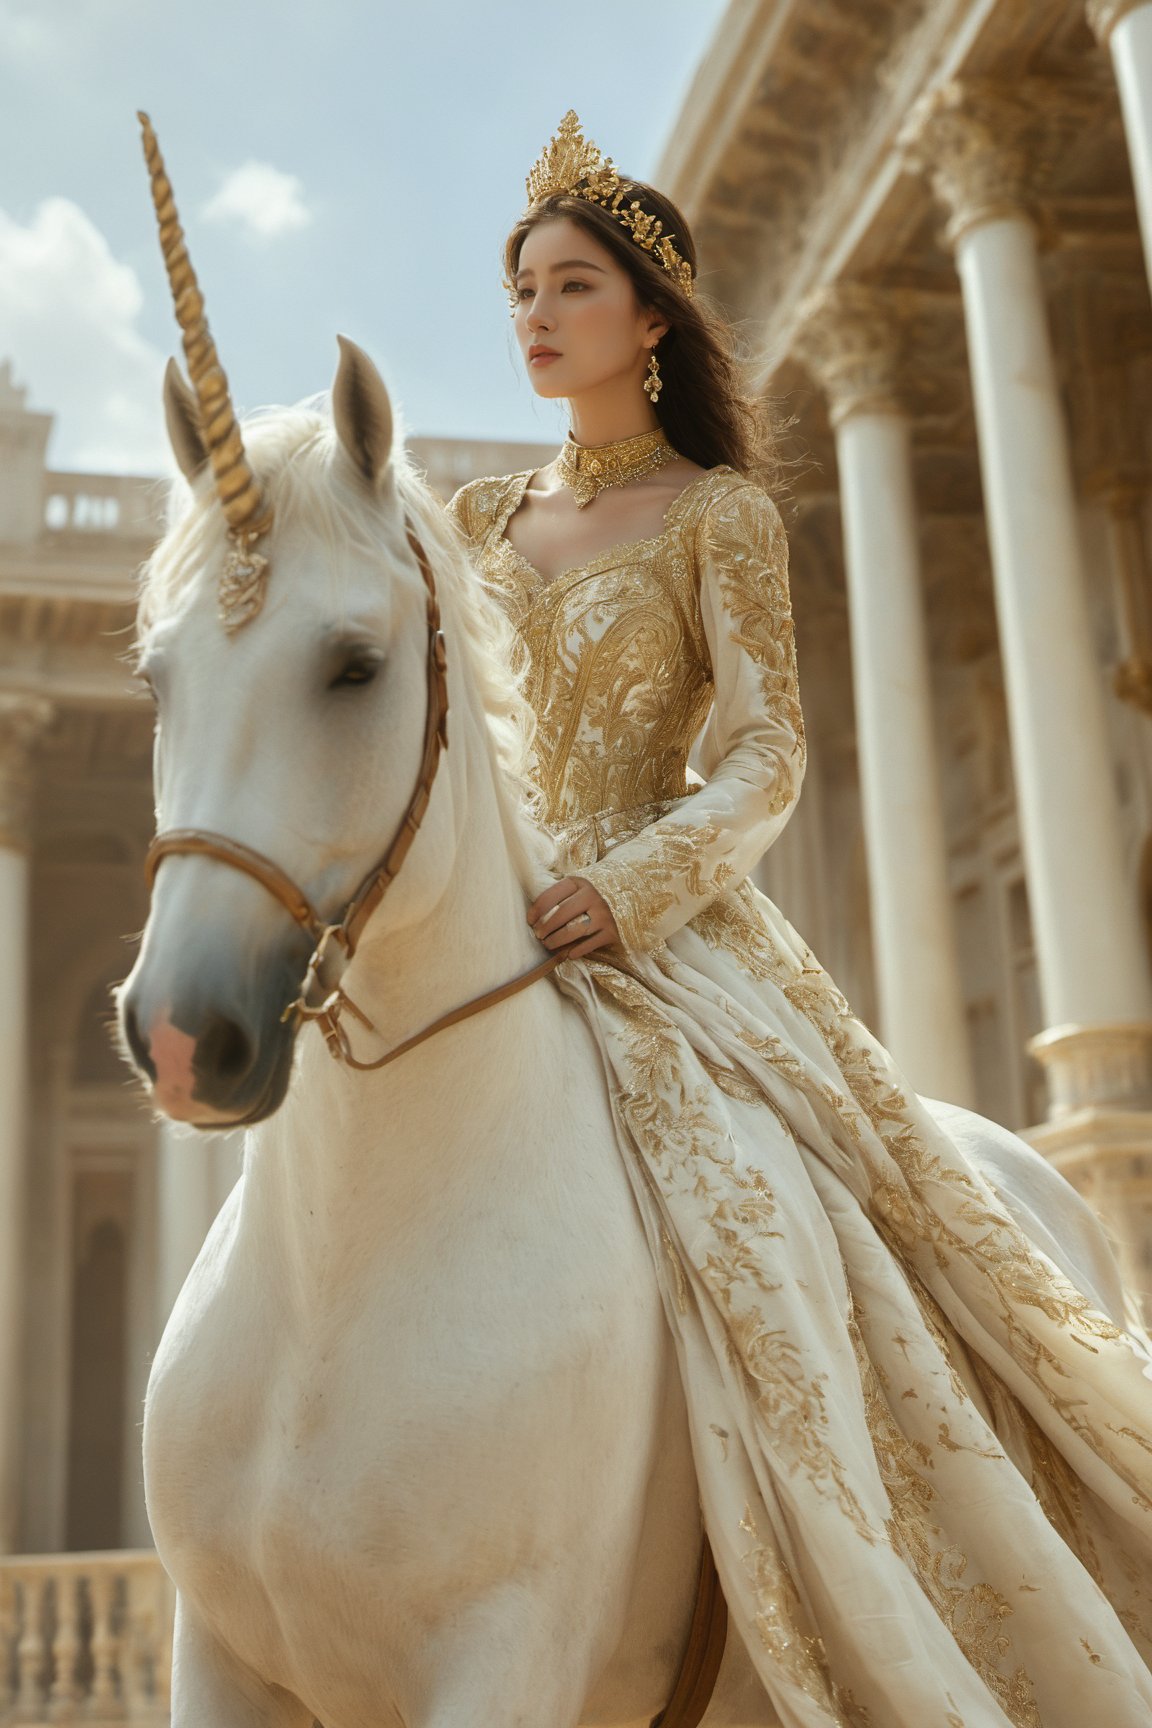 A young woman adorned in an opulent golden and white gown, with intricate embroidery and embellishments. She wears a crown with a prominent gemstone. The woman is positioned in front of a grand architectural structure, possibly a palace or temple, with tall white pillars and golden detailing. The backdrop is illuminated with a soft, ethereal light, casting a dreamy ambiance. The woman is also seen riding a majestic white horse, which has golden accents, including a decorative nose ring.